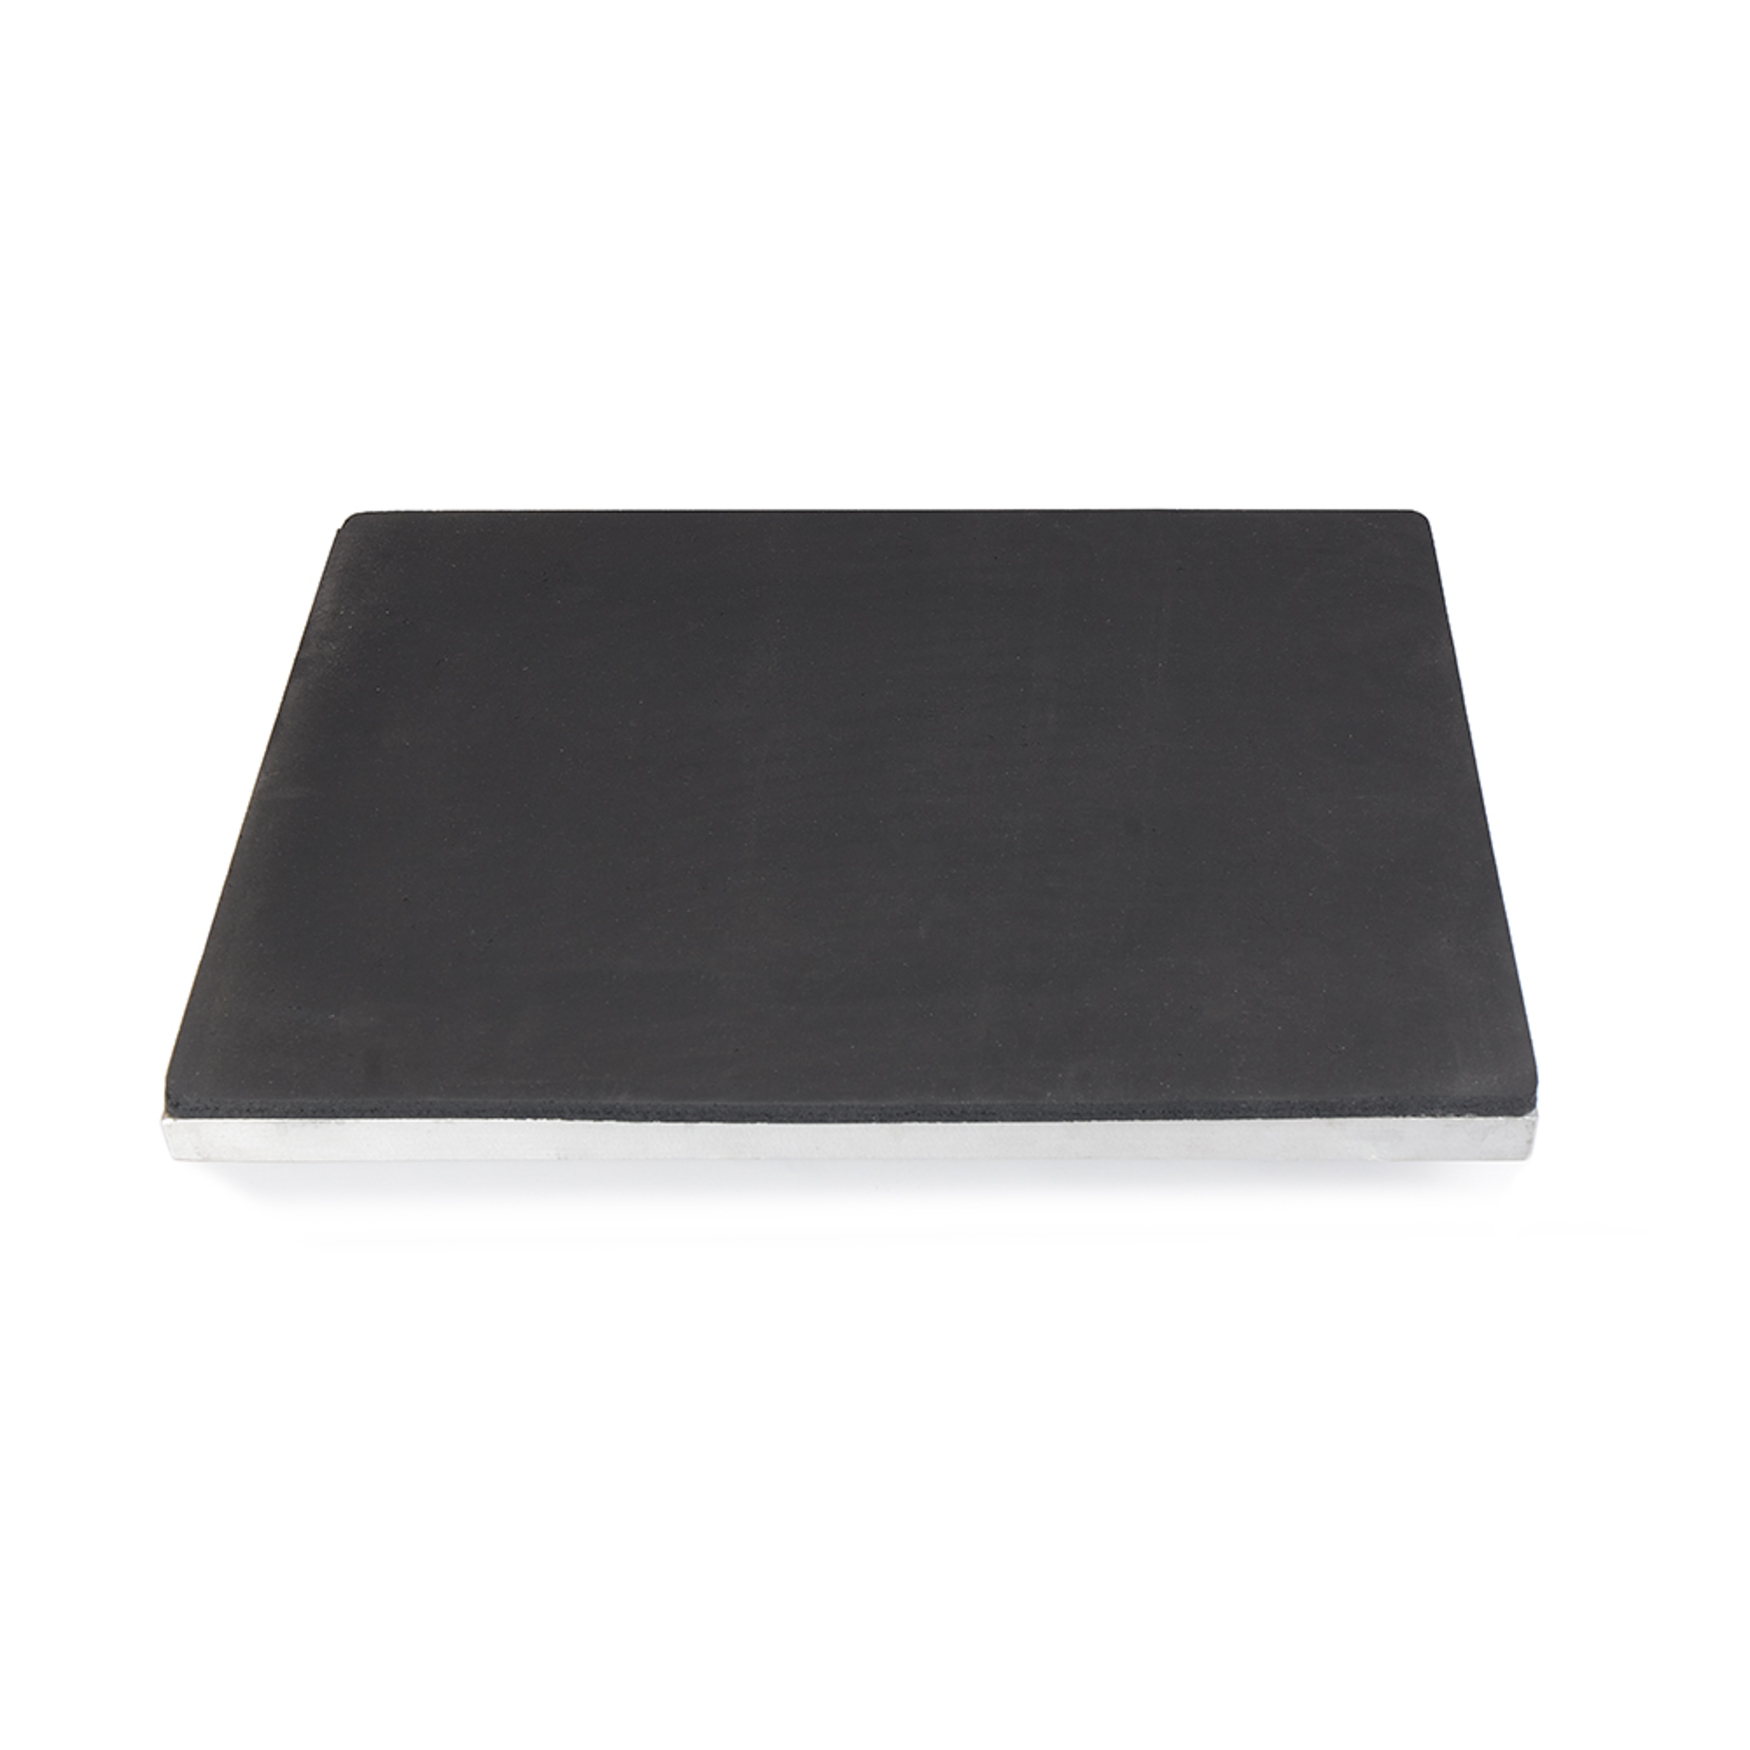 Base plate 40cm x 50cm for cover adapter for SMART